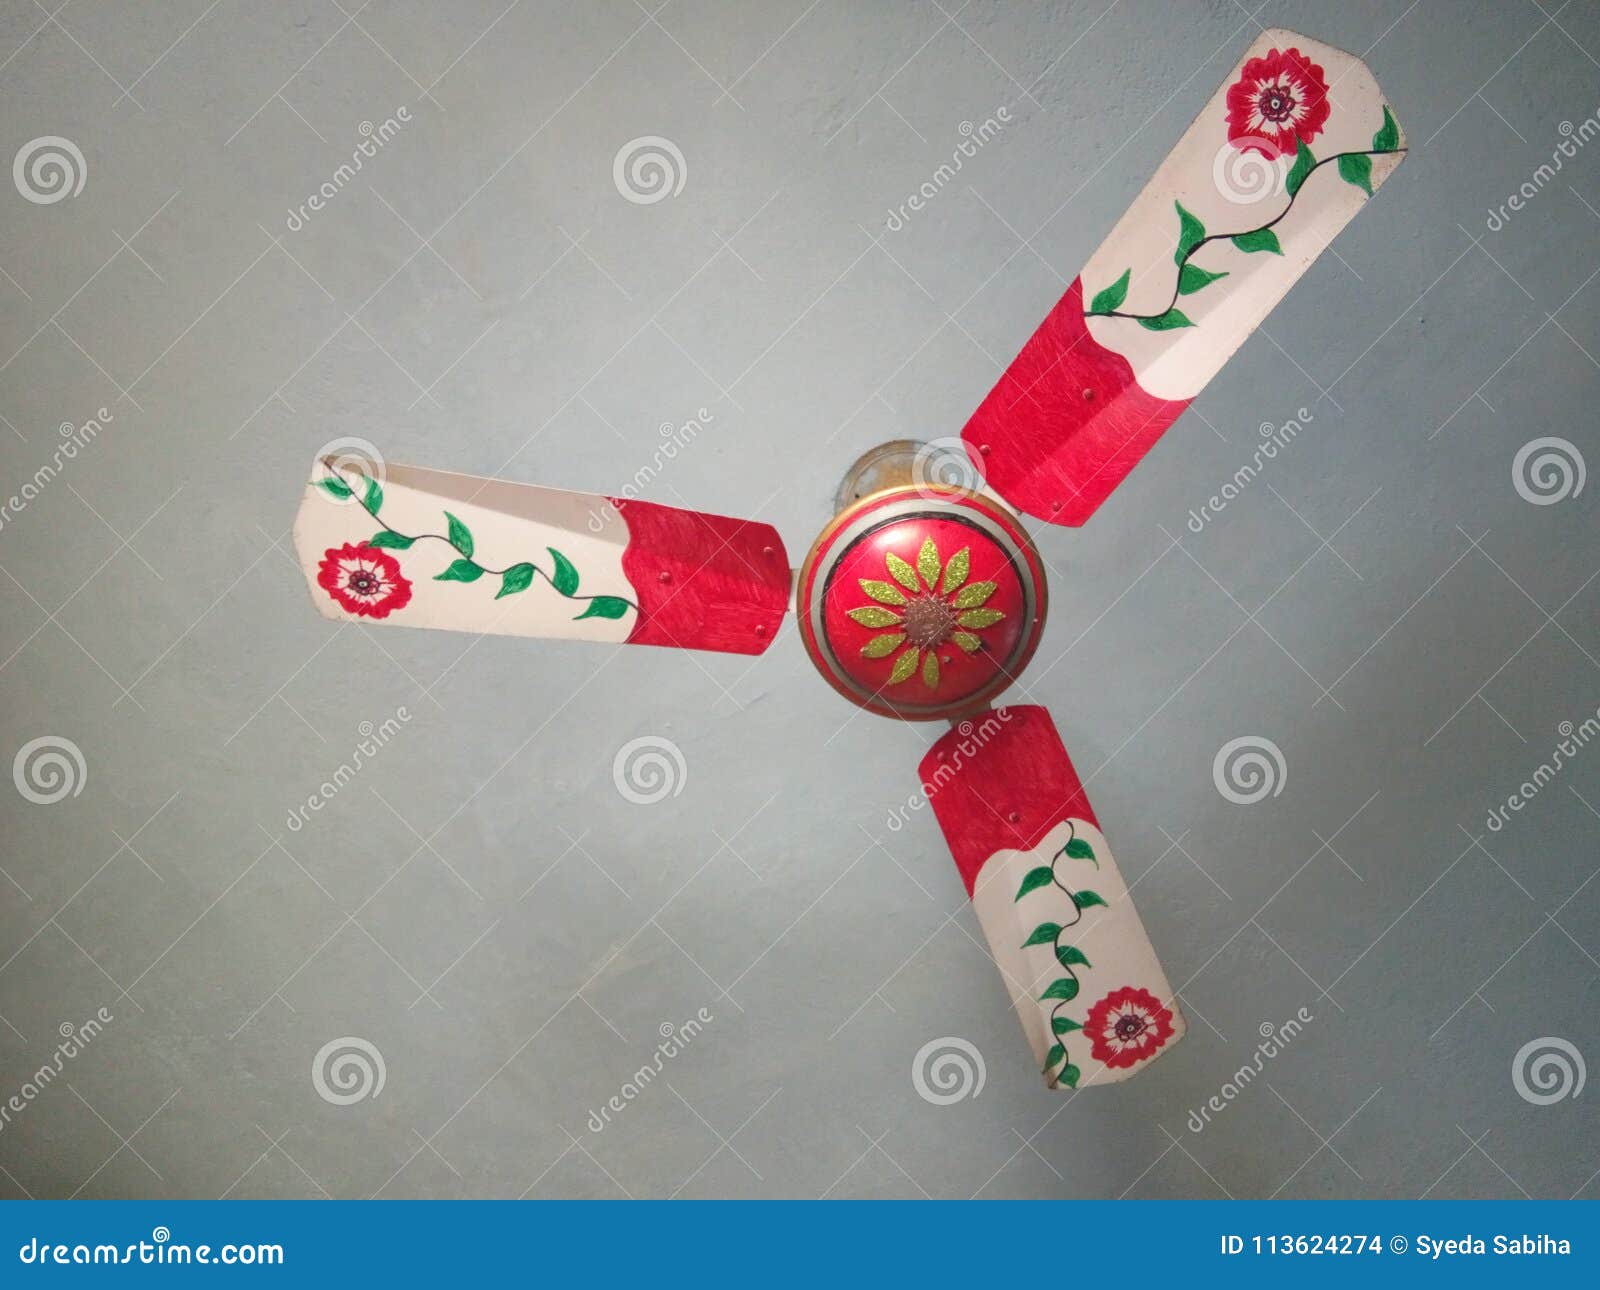 Ceiling Fan Decoration Stock Photo Image Of Ceiling 113624274